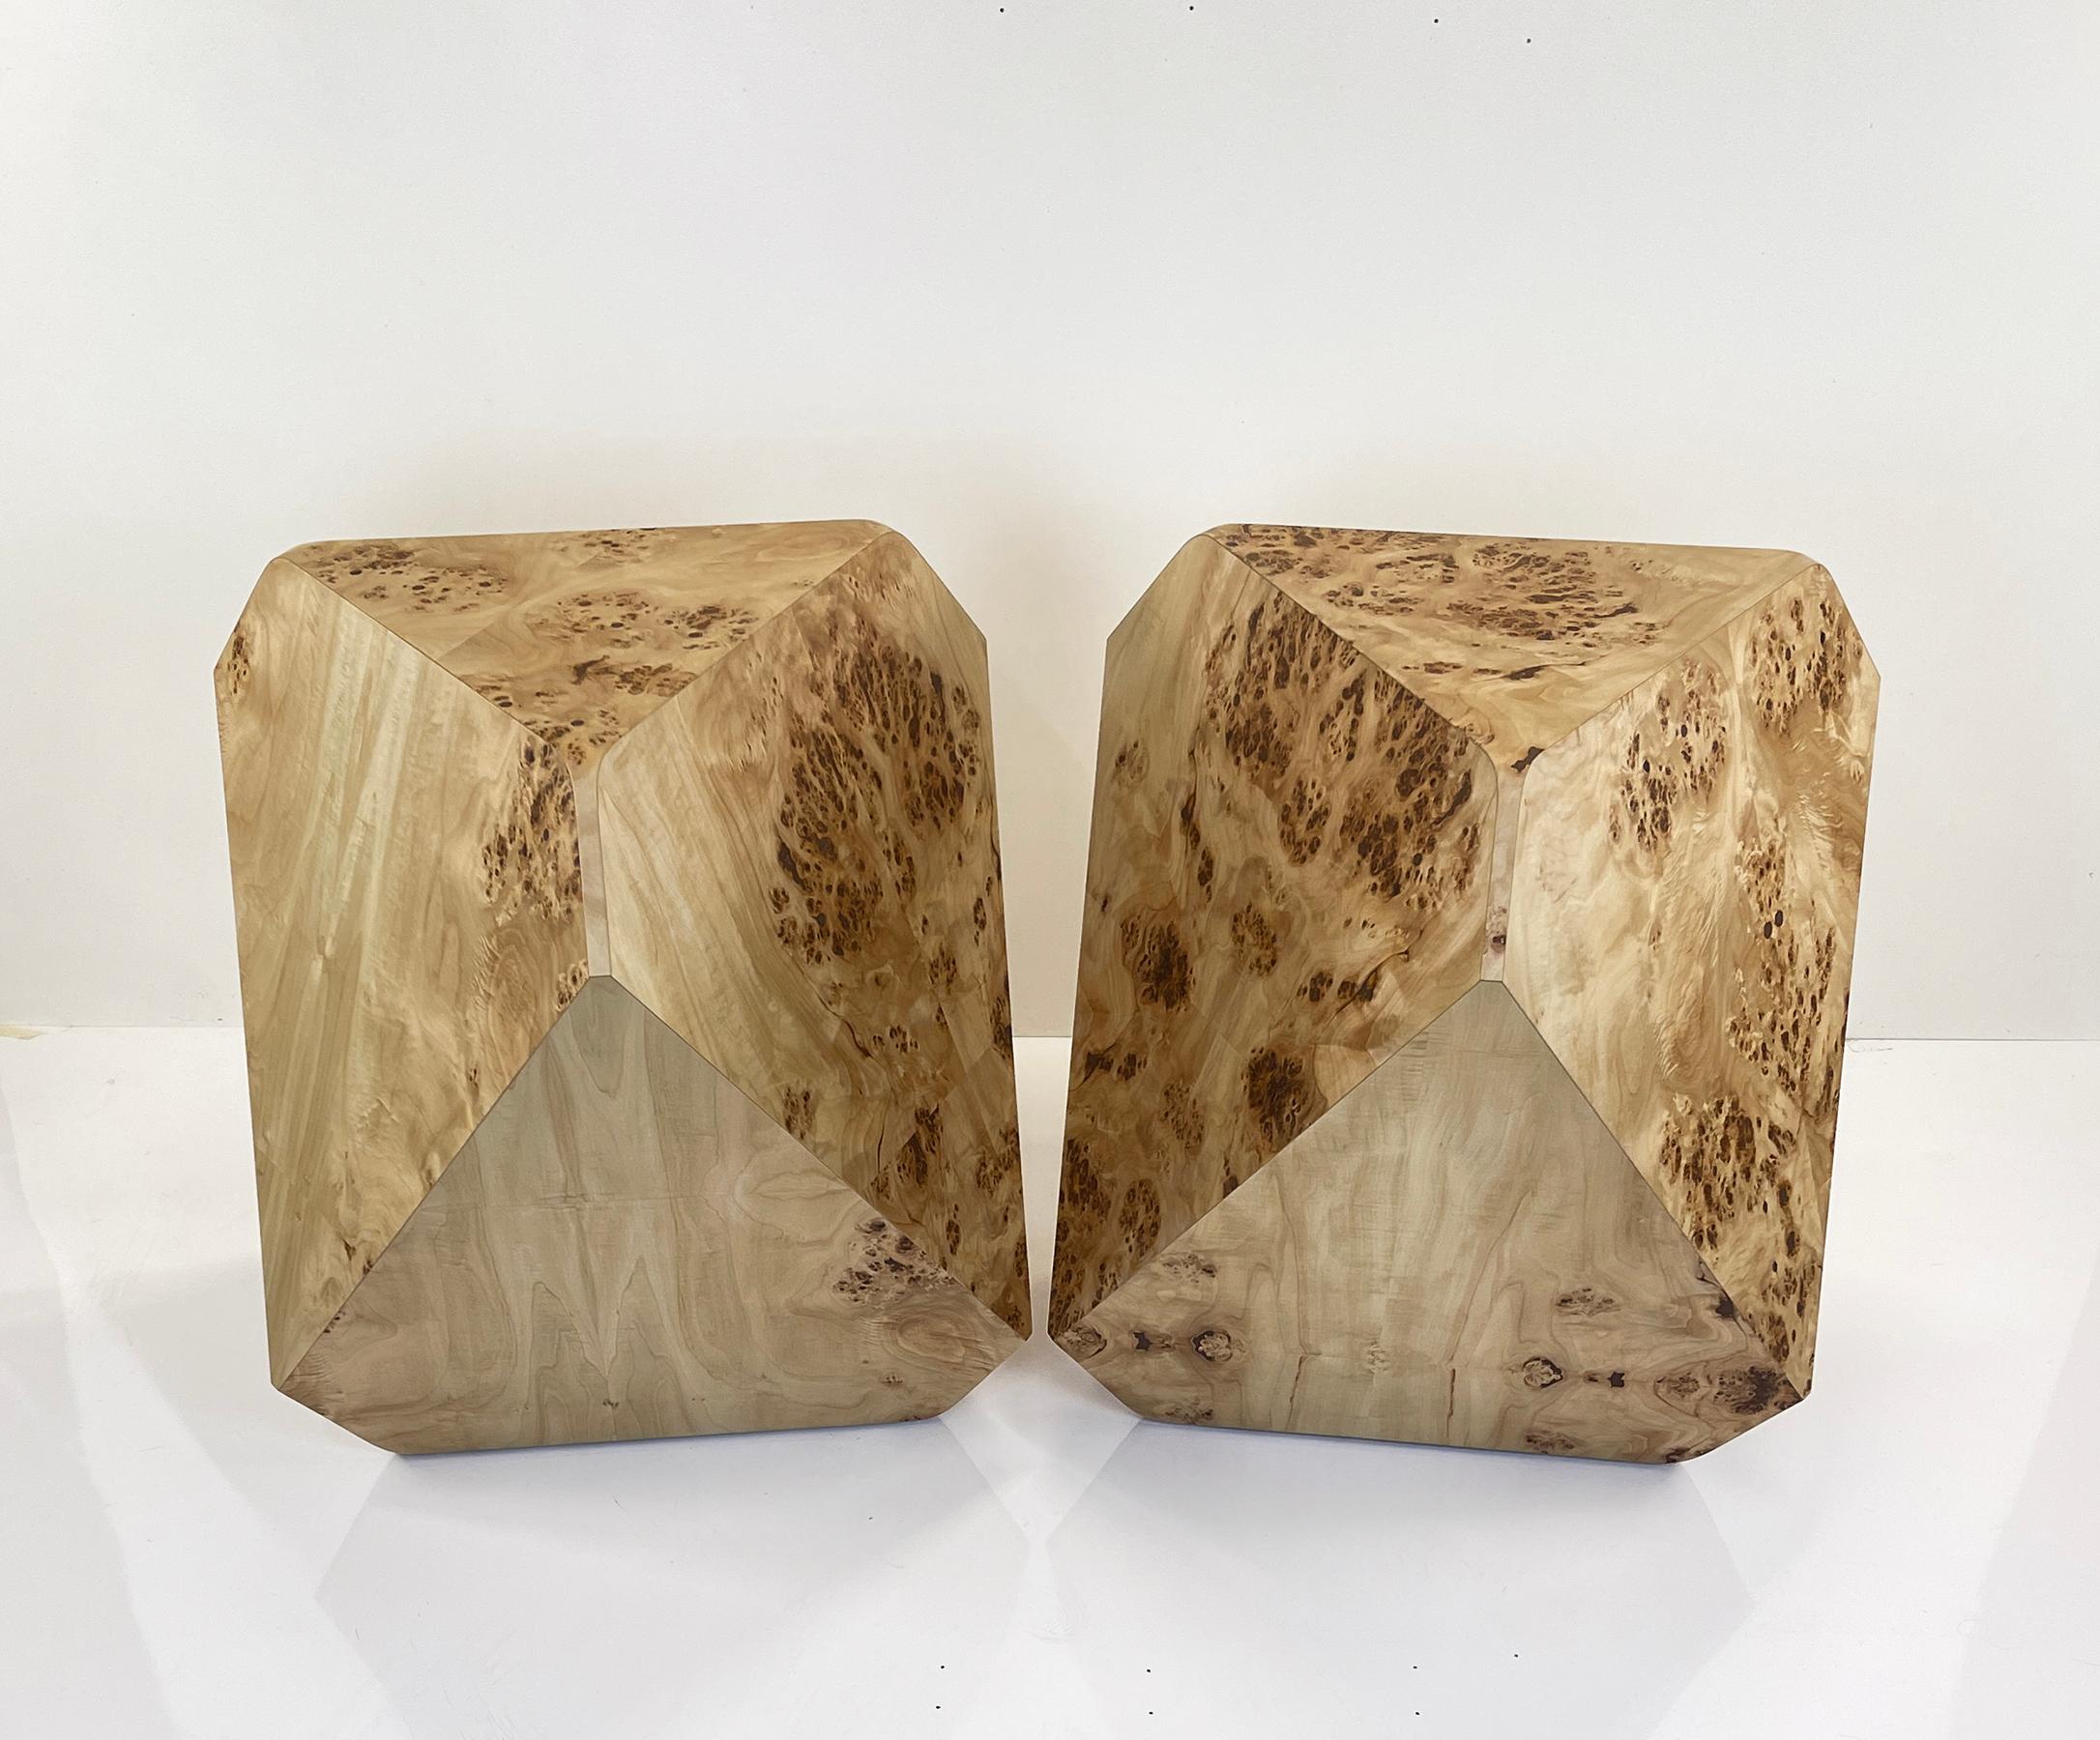 American William Earle's iconic 'hal' dining pedestals in European Mappa burl For Sale